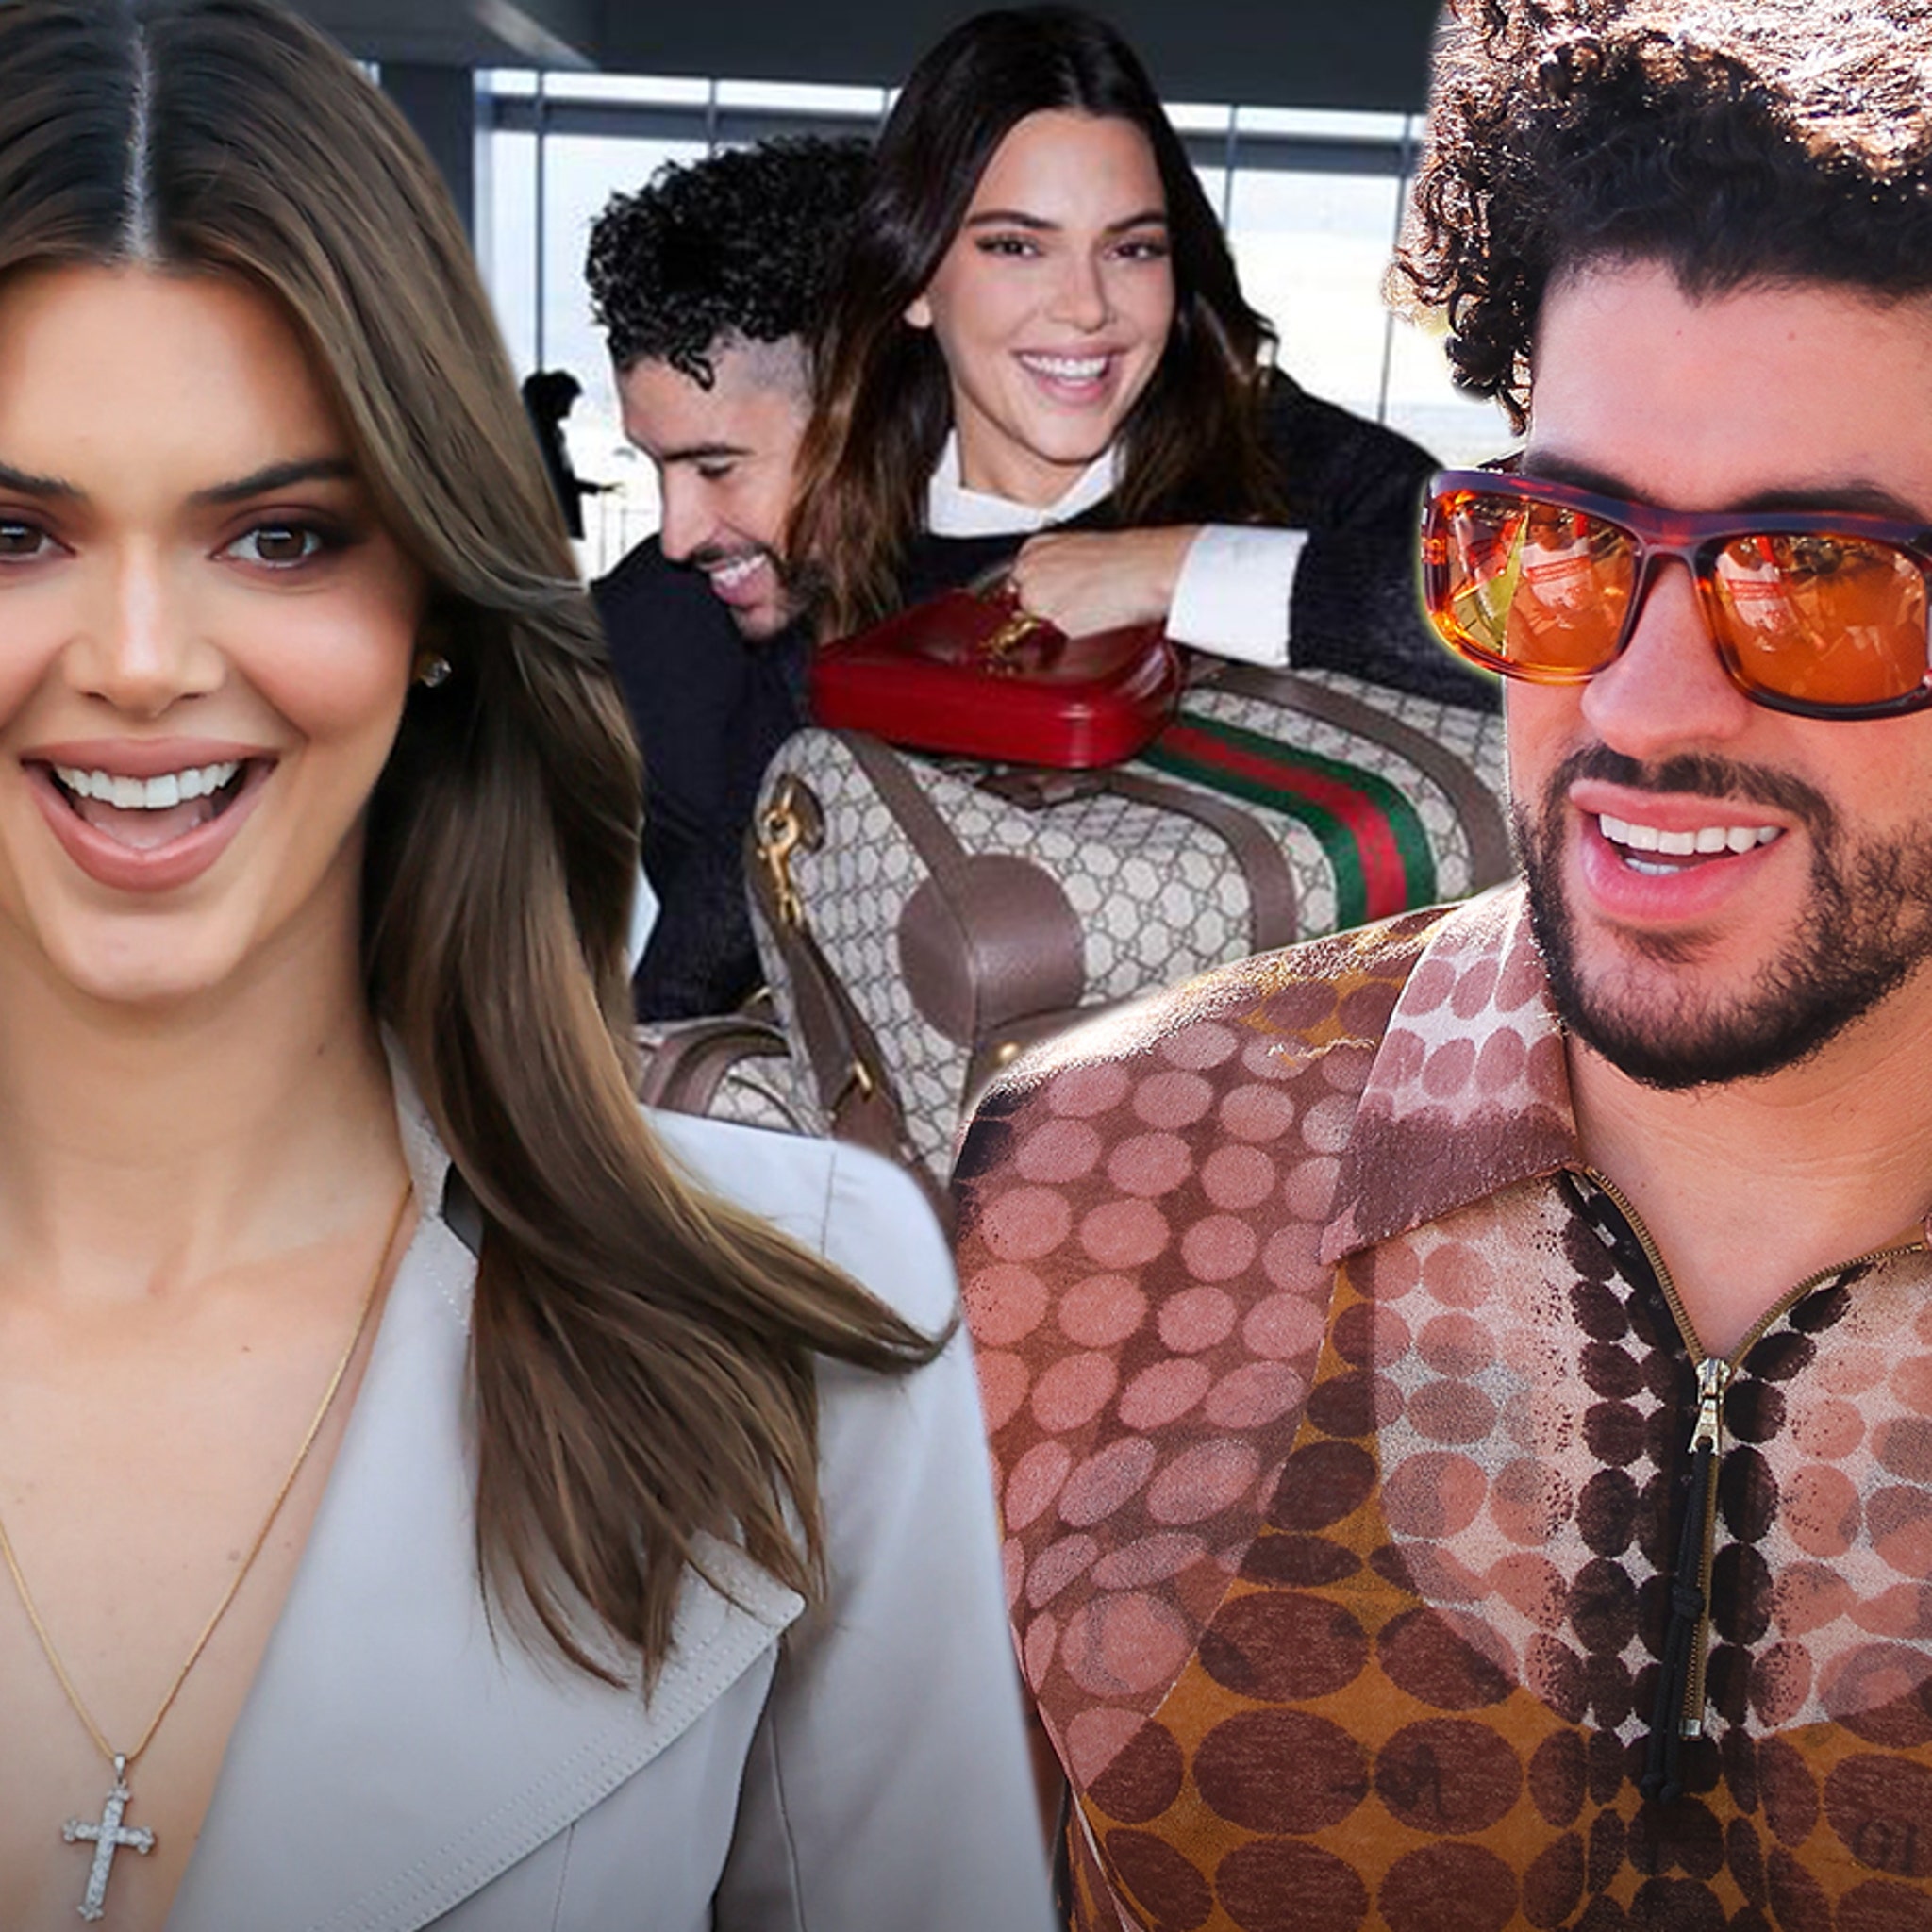 Kendall Jenner and Bad Bunny Costar in Gucci Valigeria Campaign